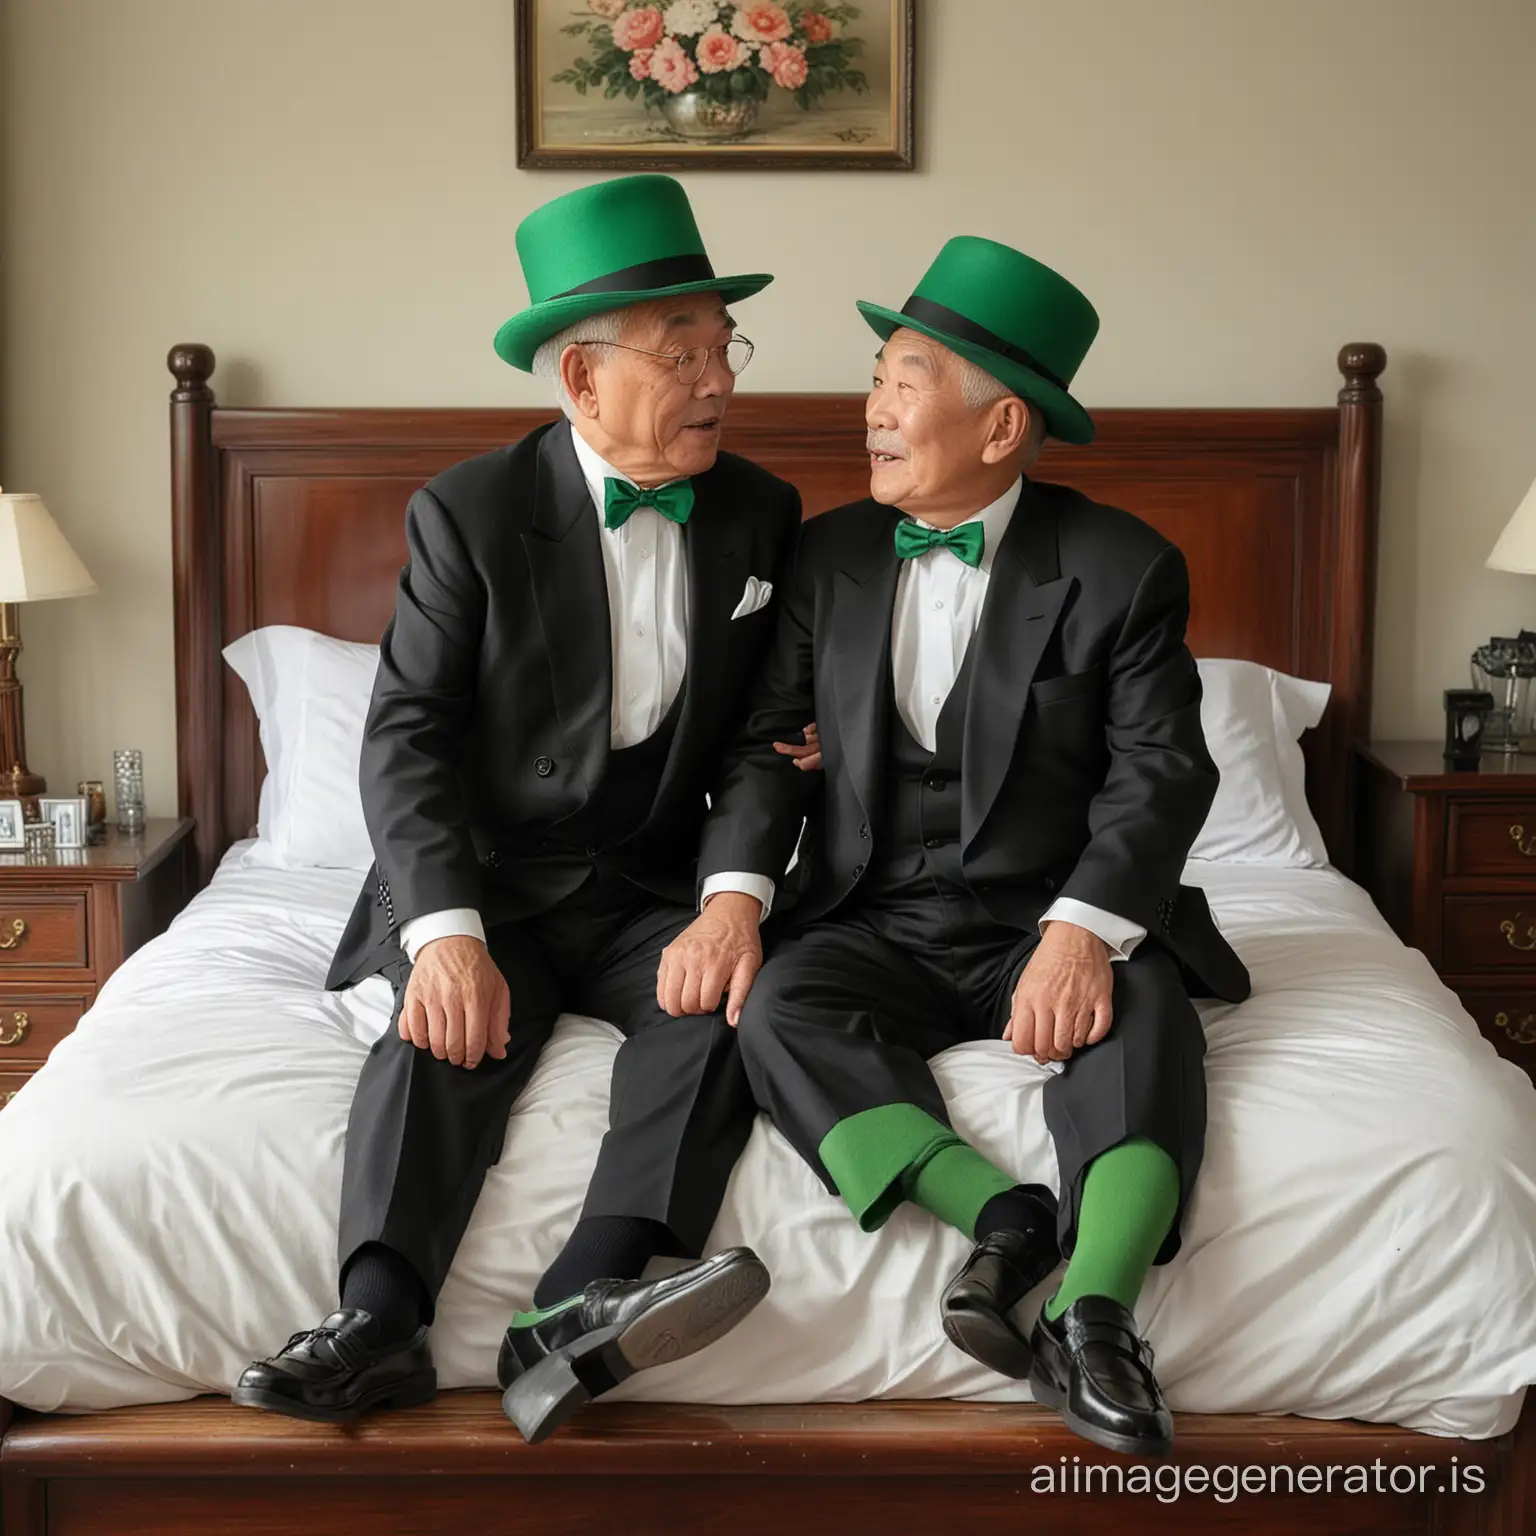 Elderly-Chinese-Couple-Affectionately-Kissing-in-Coordinated-Formal-Attire-on-Bed